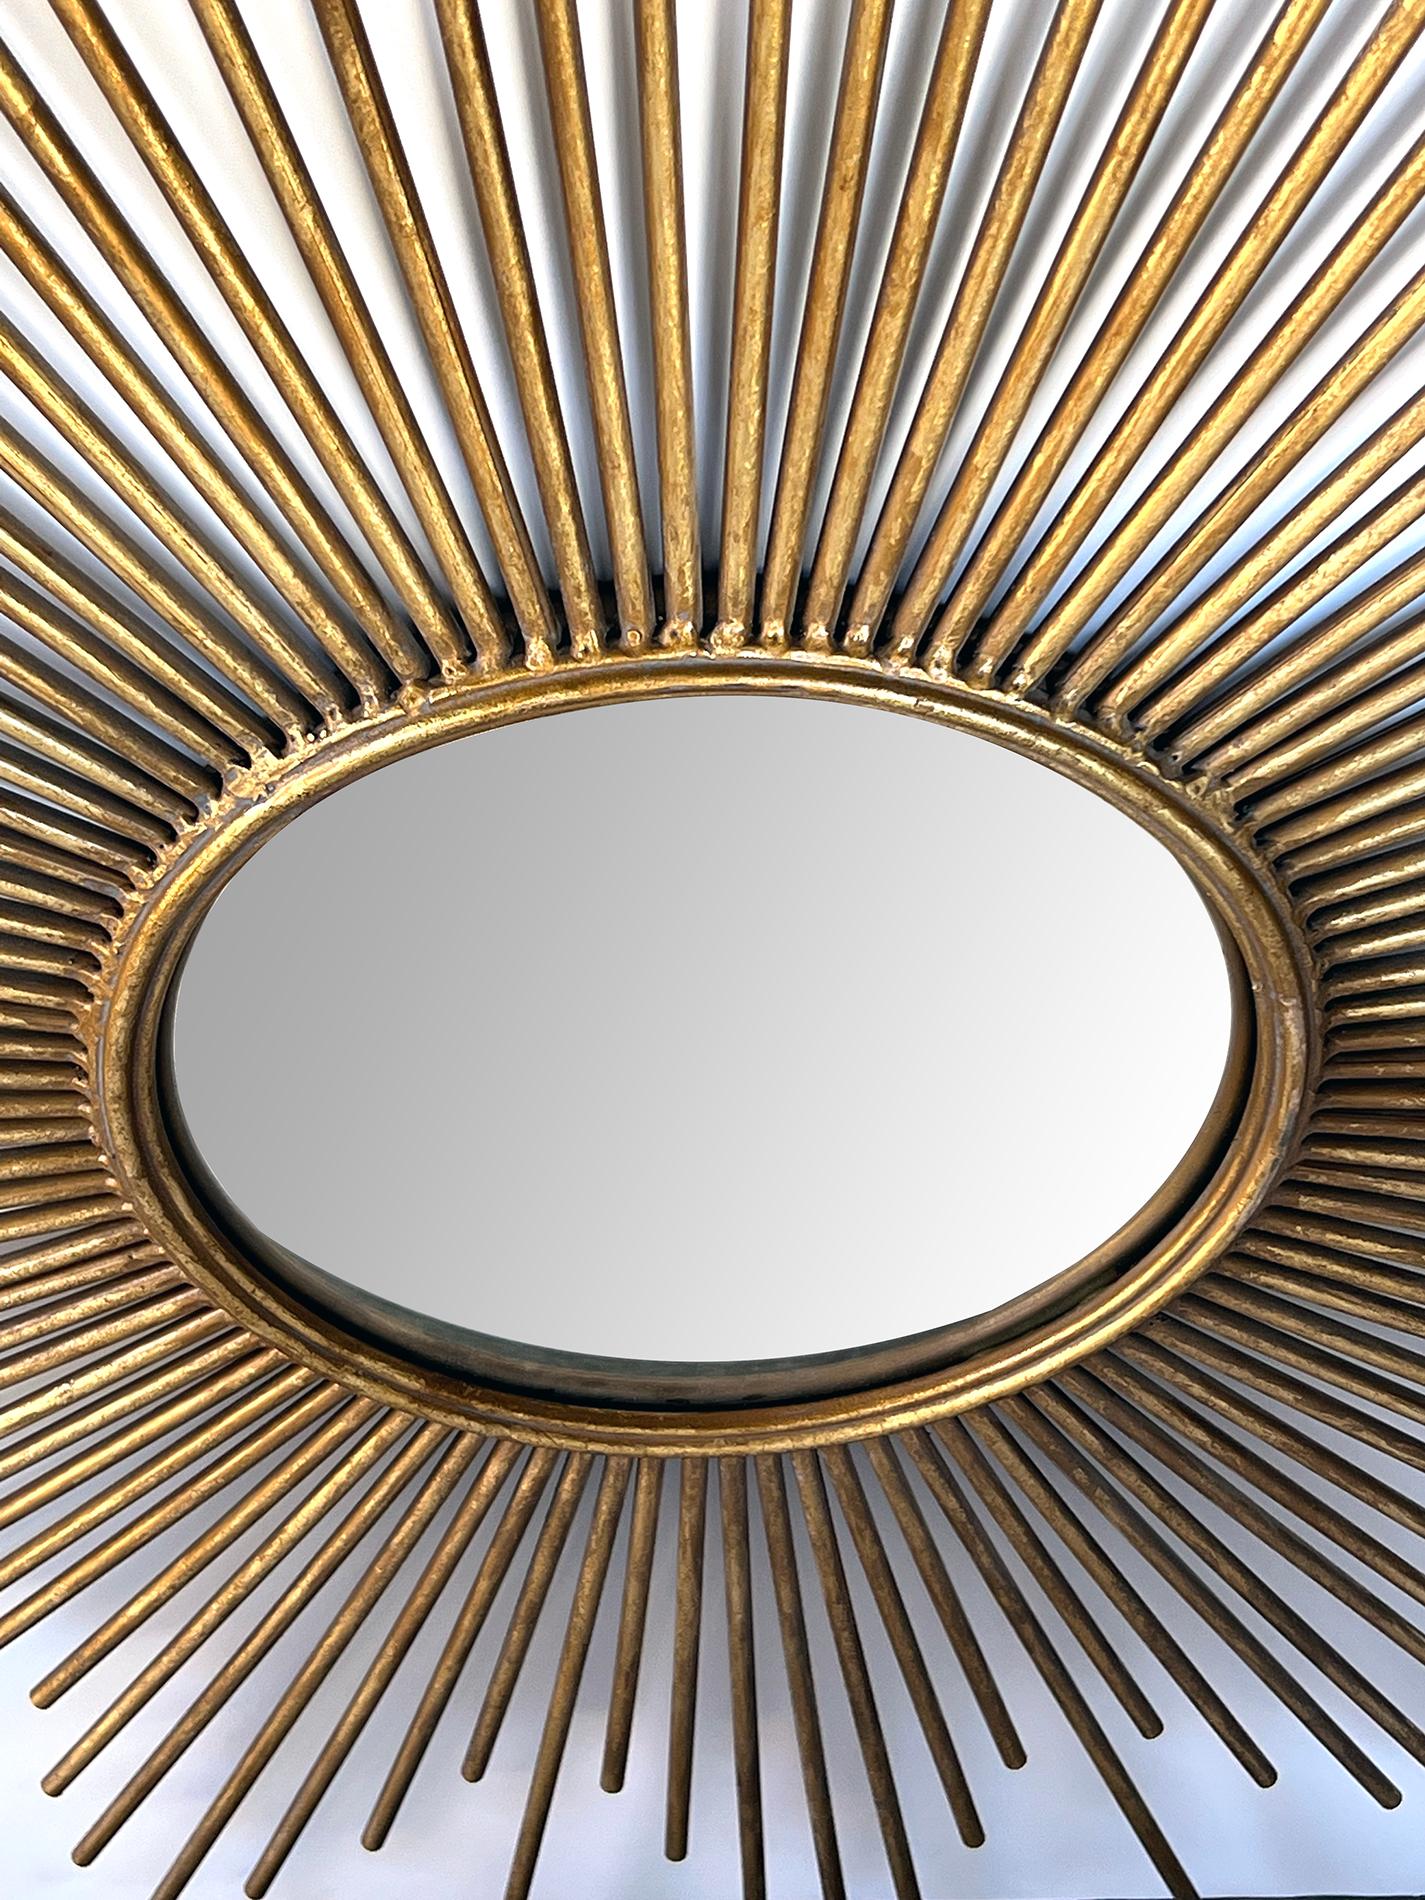 centering a convex mirror within a gilt metal frame consisting of radiating spokes of varying lengths